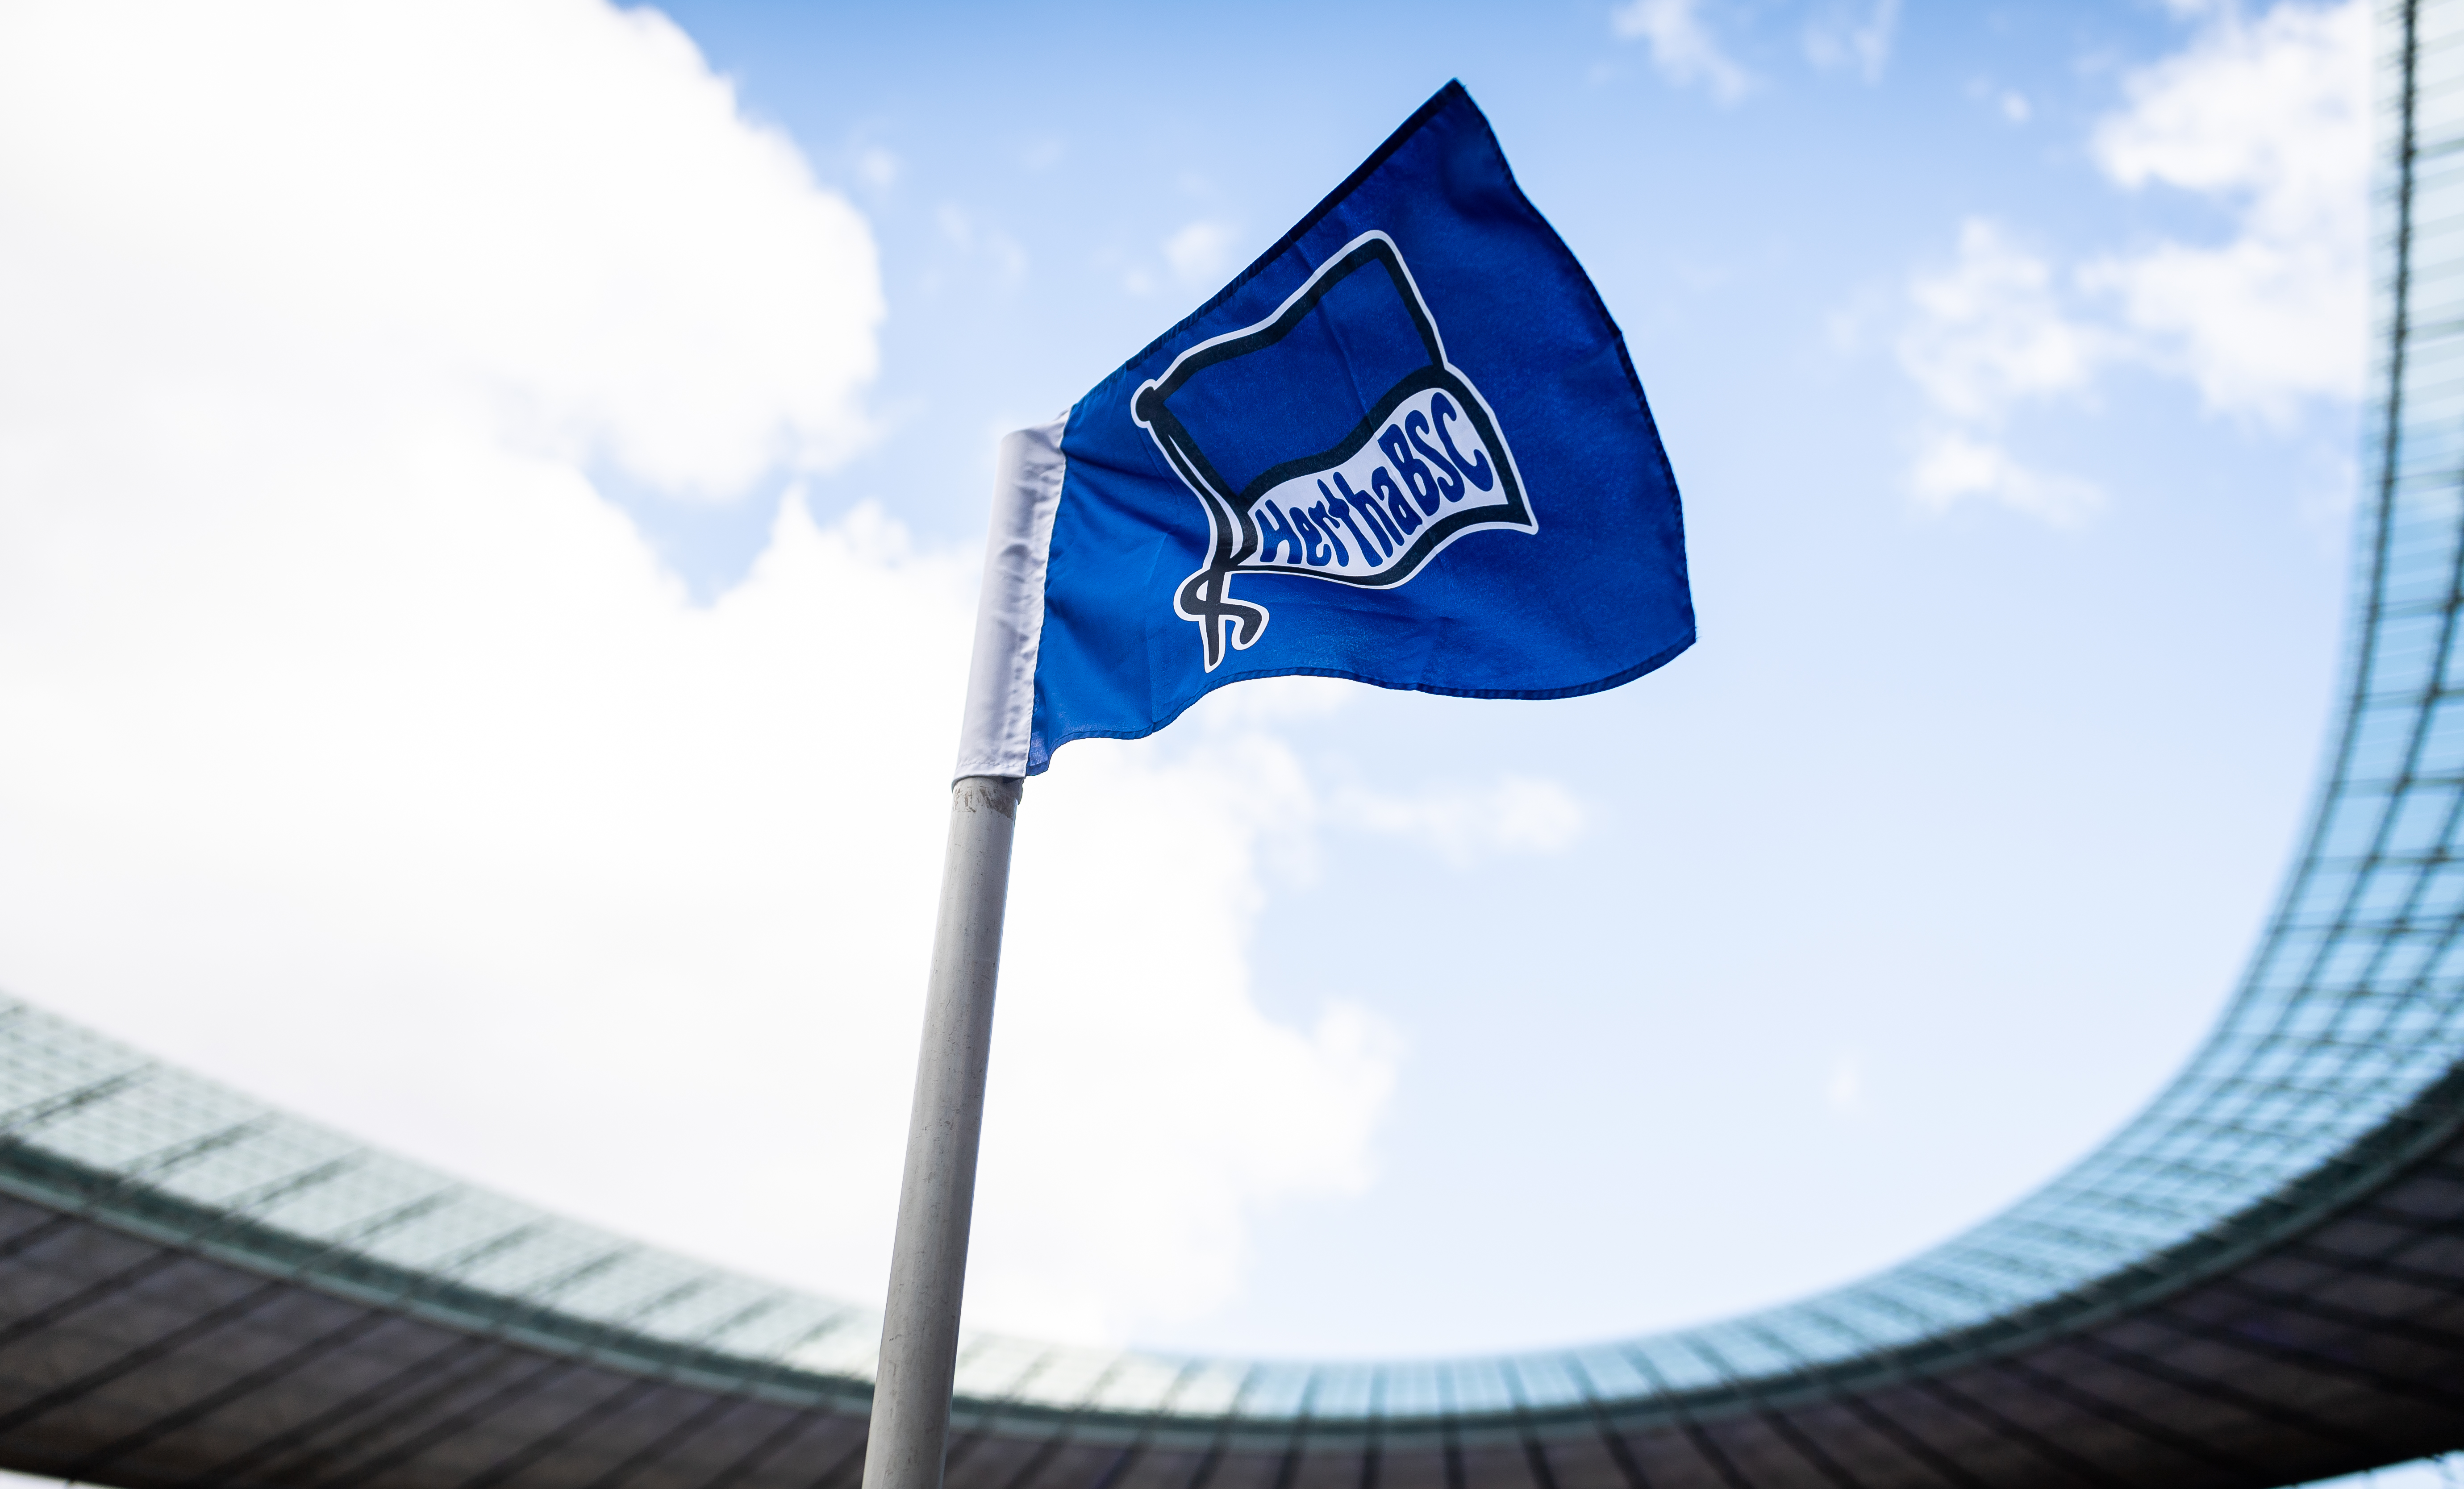 A corner flag at the Olympiastadion.